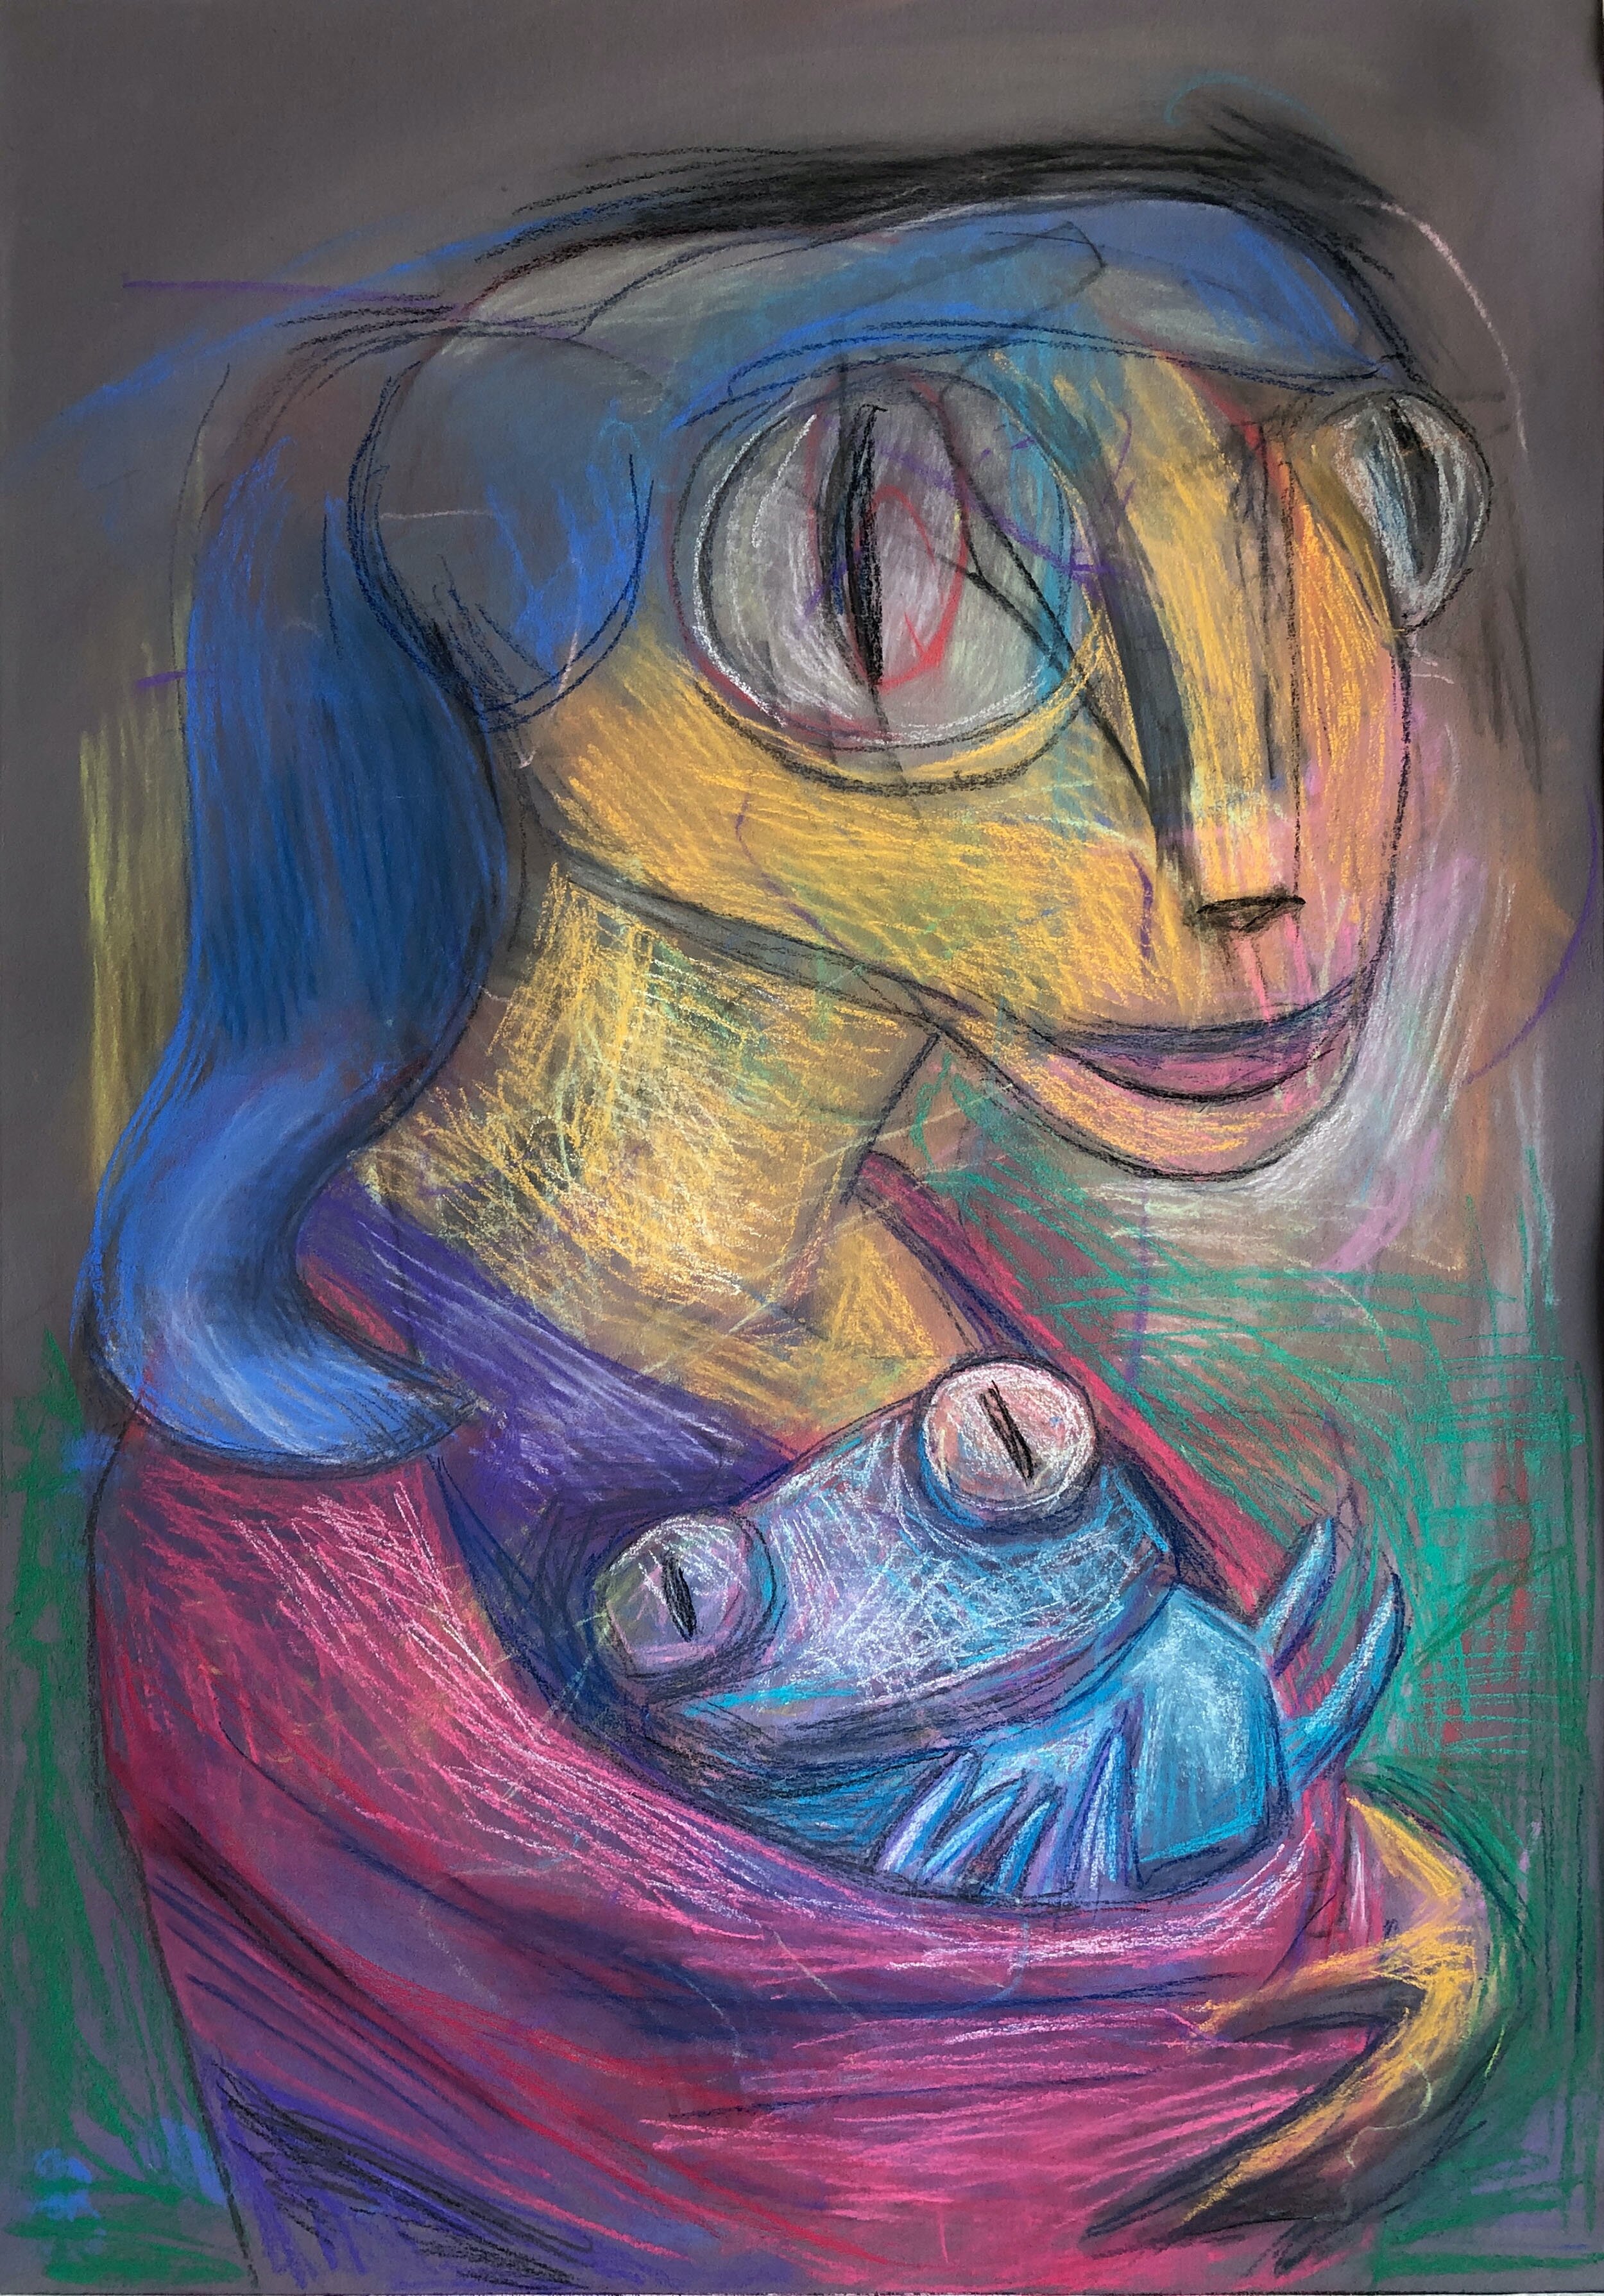 "Mother and Grub" 18.75" x 28.75" Pastel on colored Paper